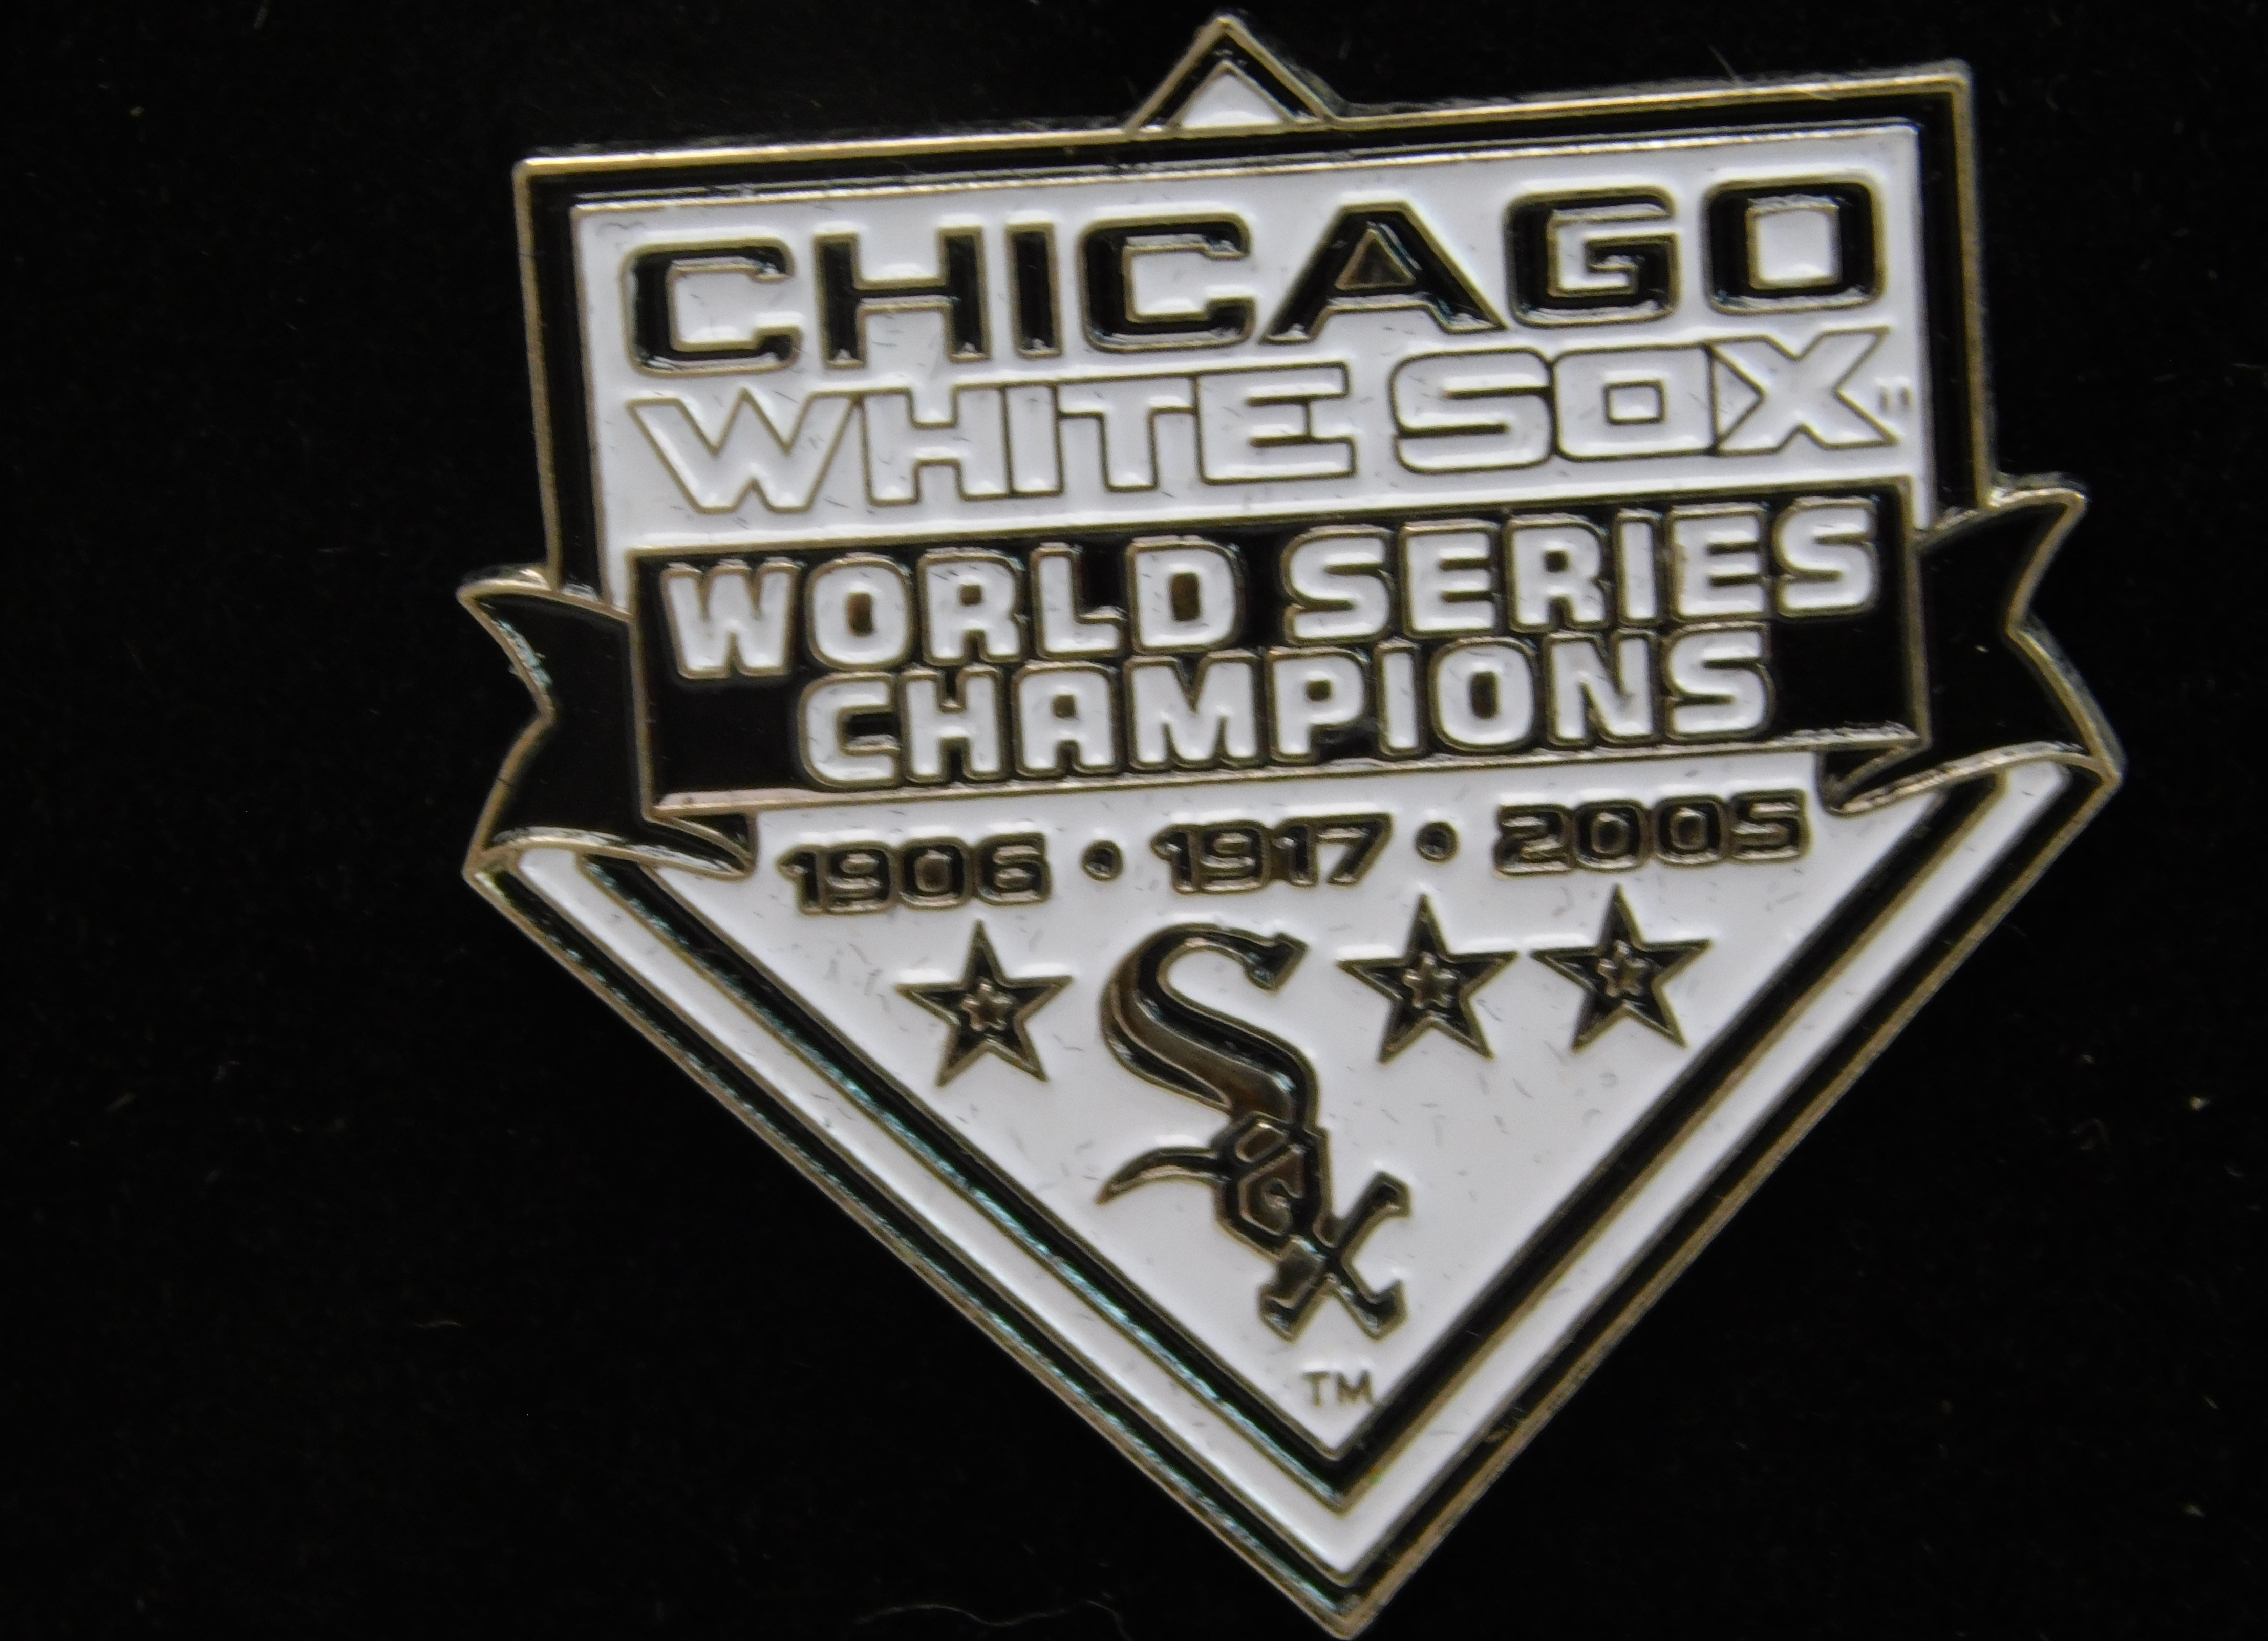 2005 World Series Champions - Chicago White Sox by The-17th-Man on